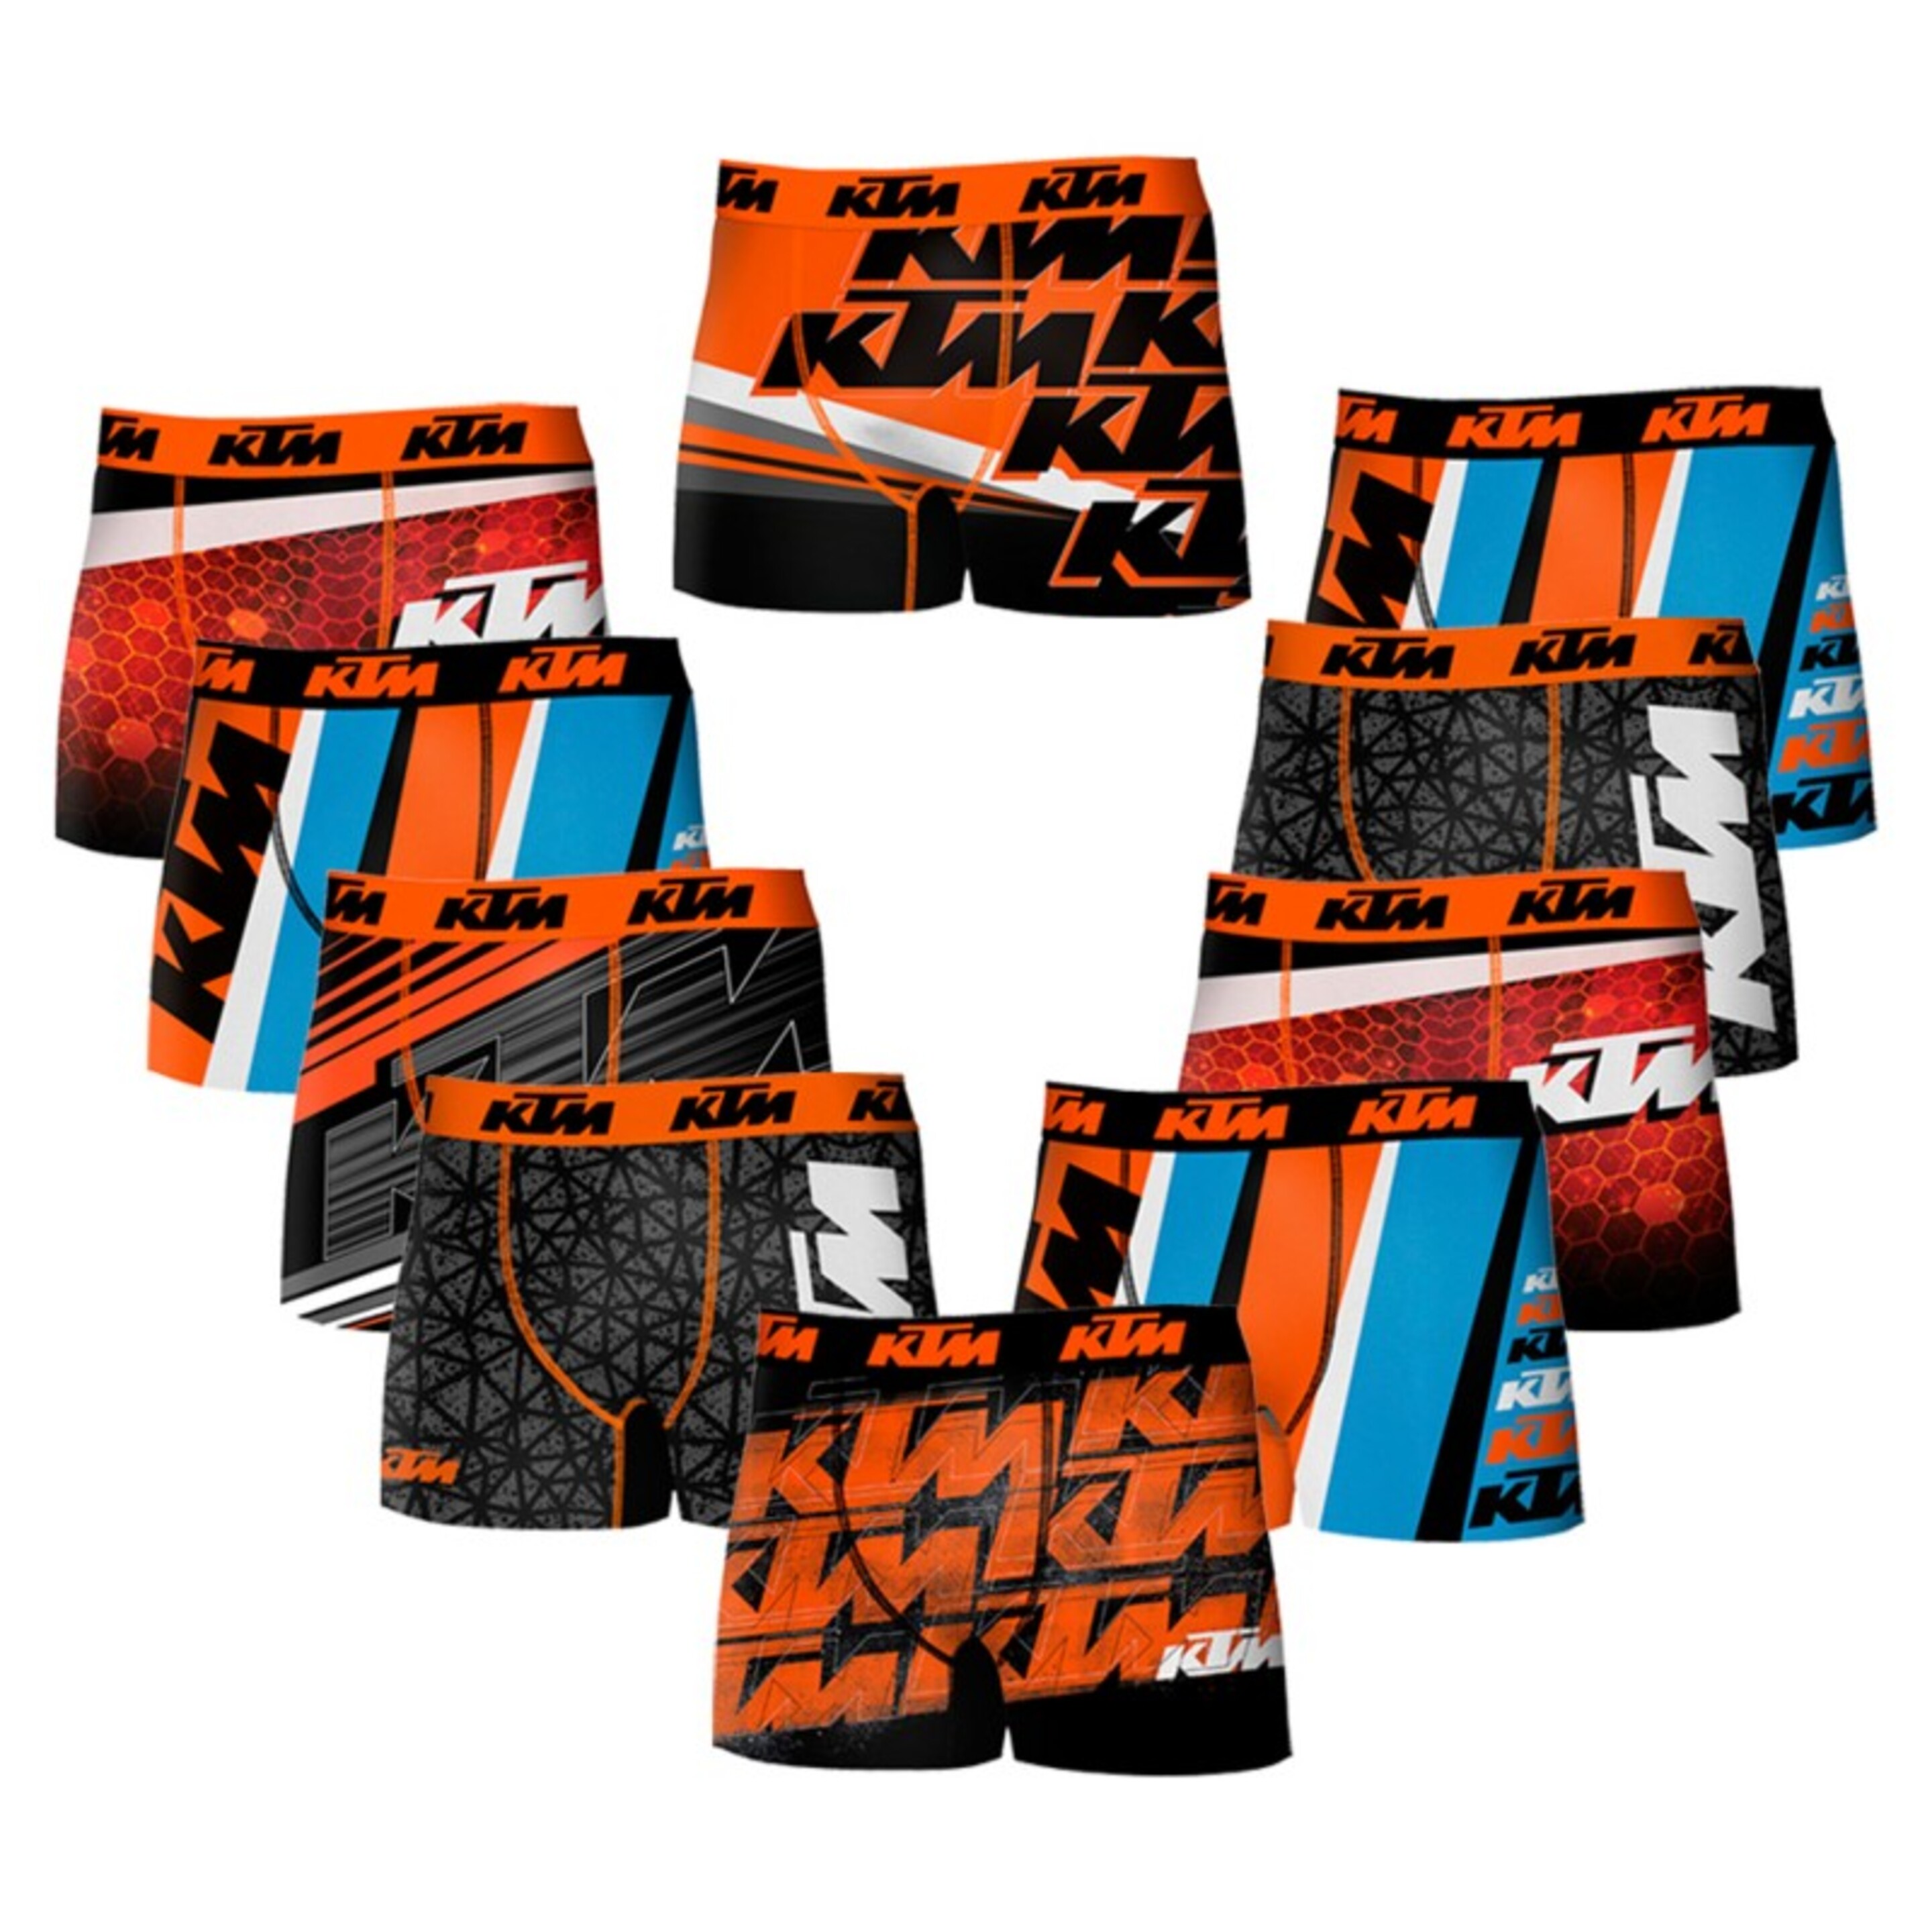 Calzoncillos Ktm Pack 10 - multicolor - 